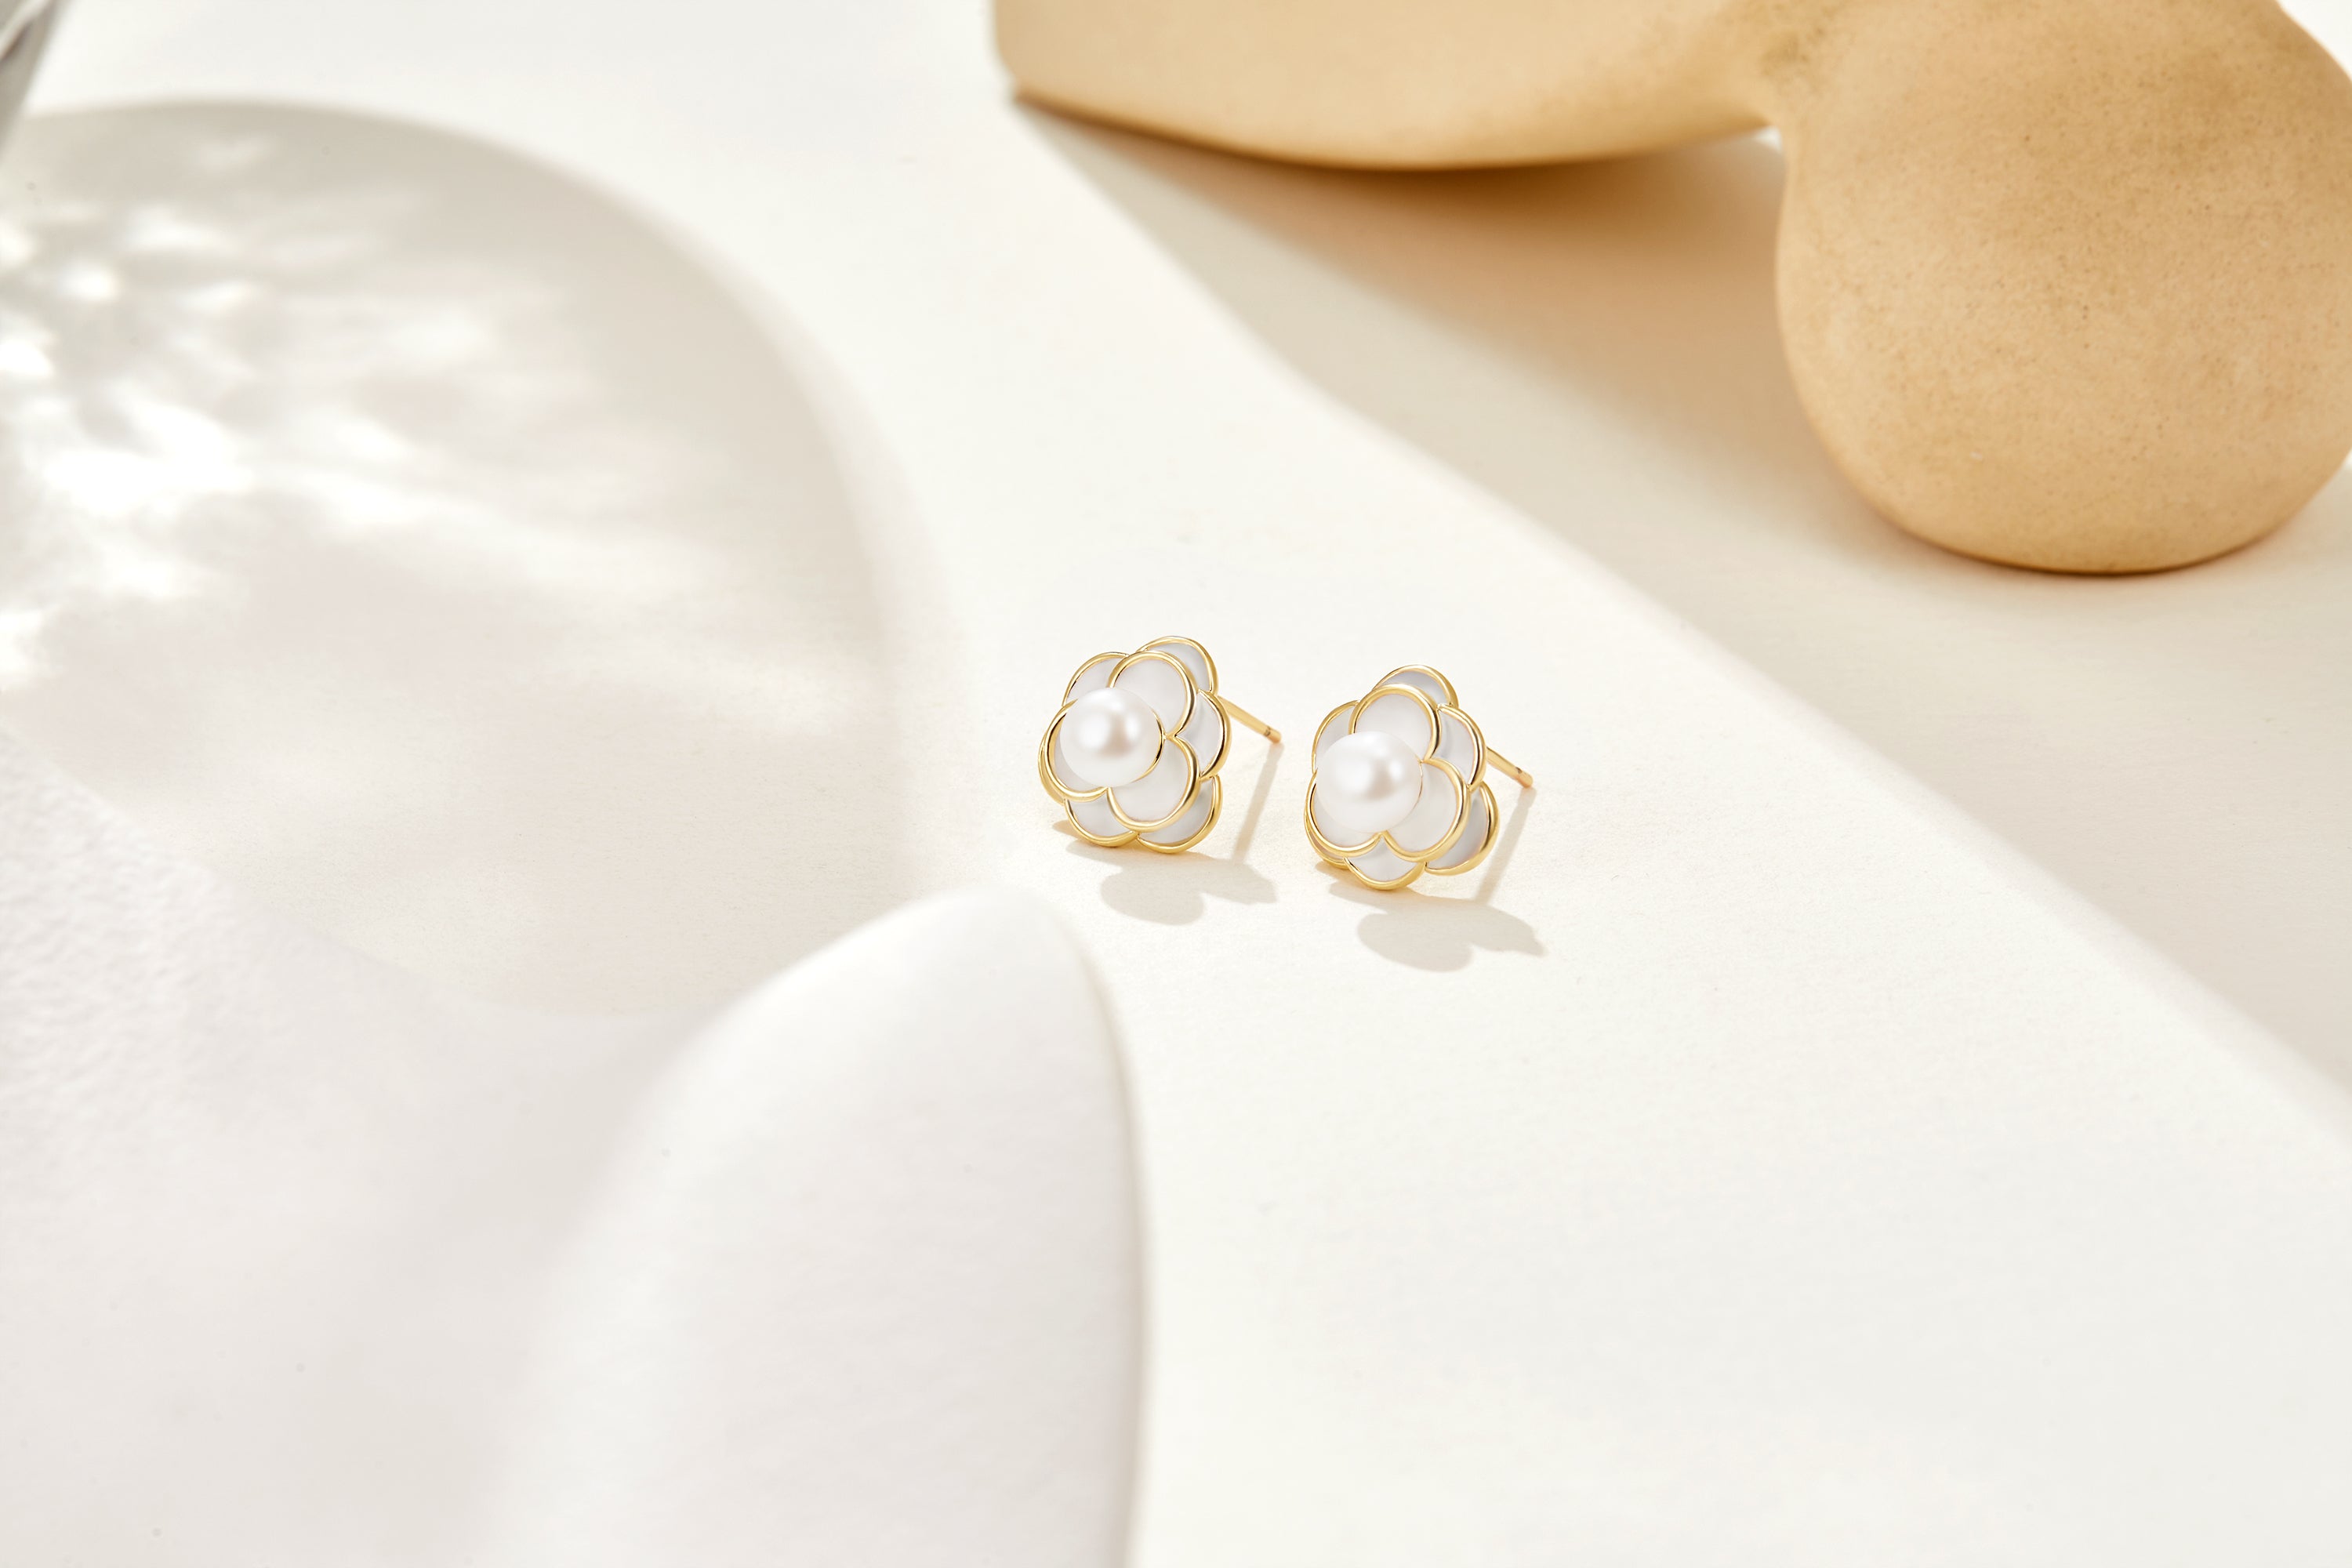 Luminous Freshwater Pearl Stud Earrings with Delicate Silver Accents